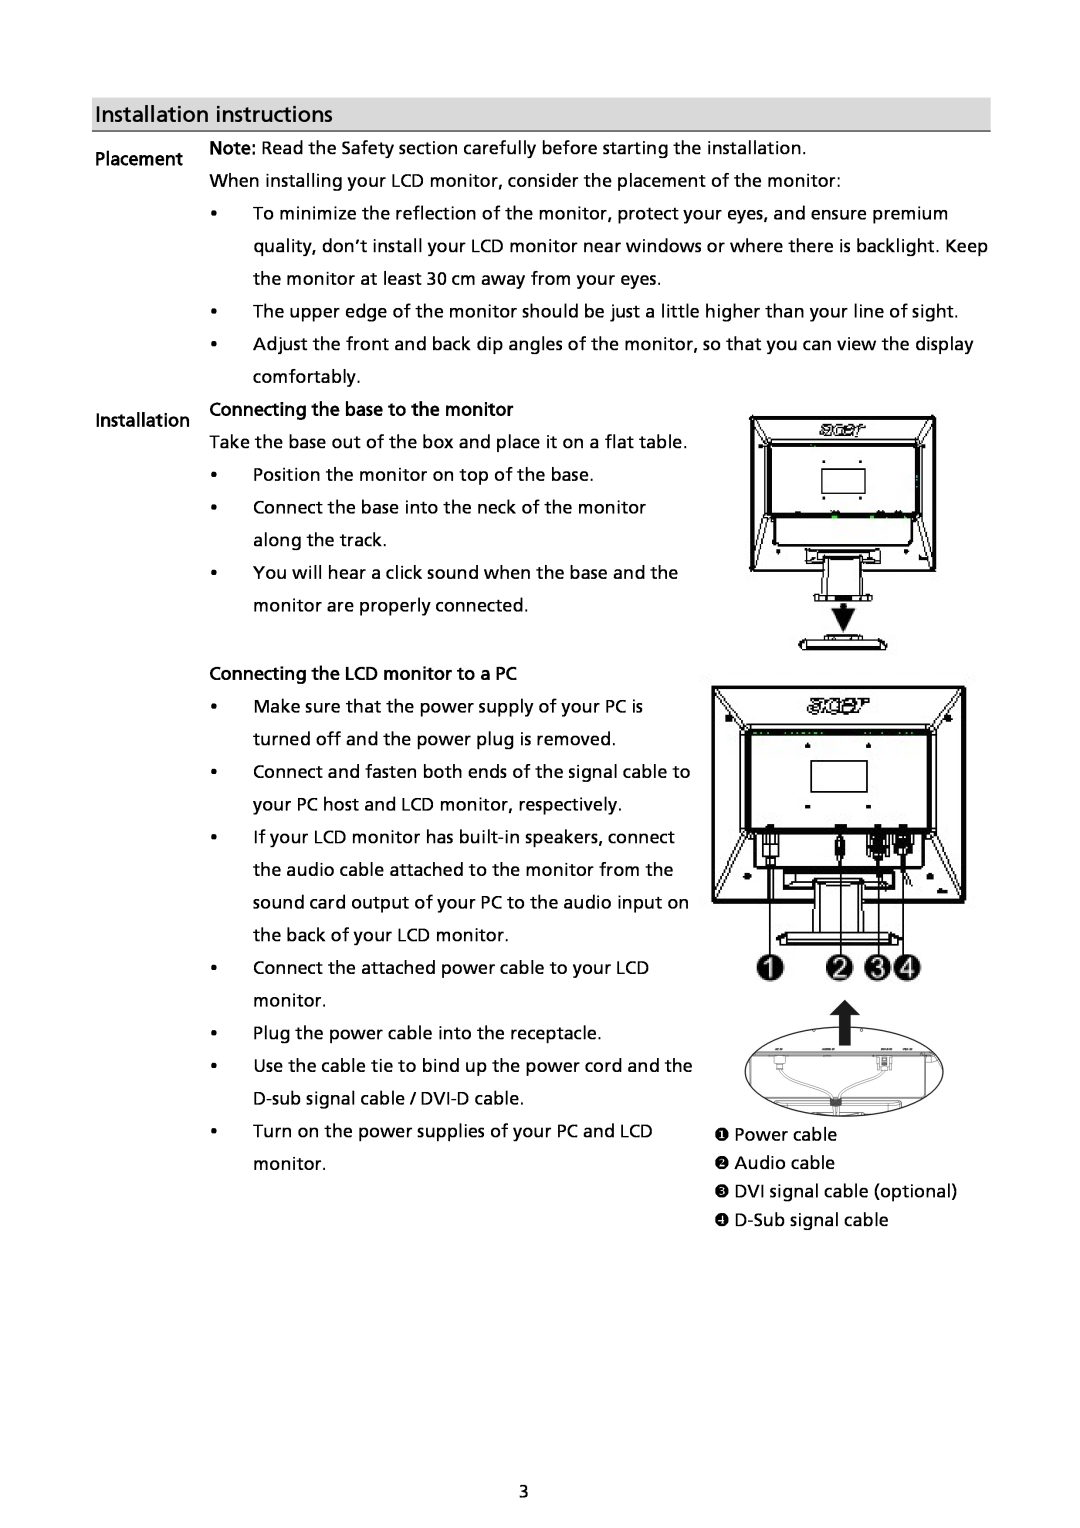 Acer AL2017 Installation instructions, Placement, Connecting the base to the monitor, Connecting the LCD monitor to a PC 